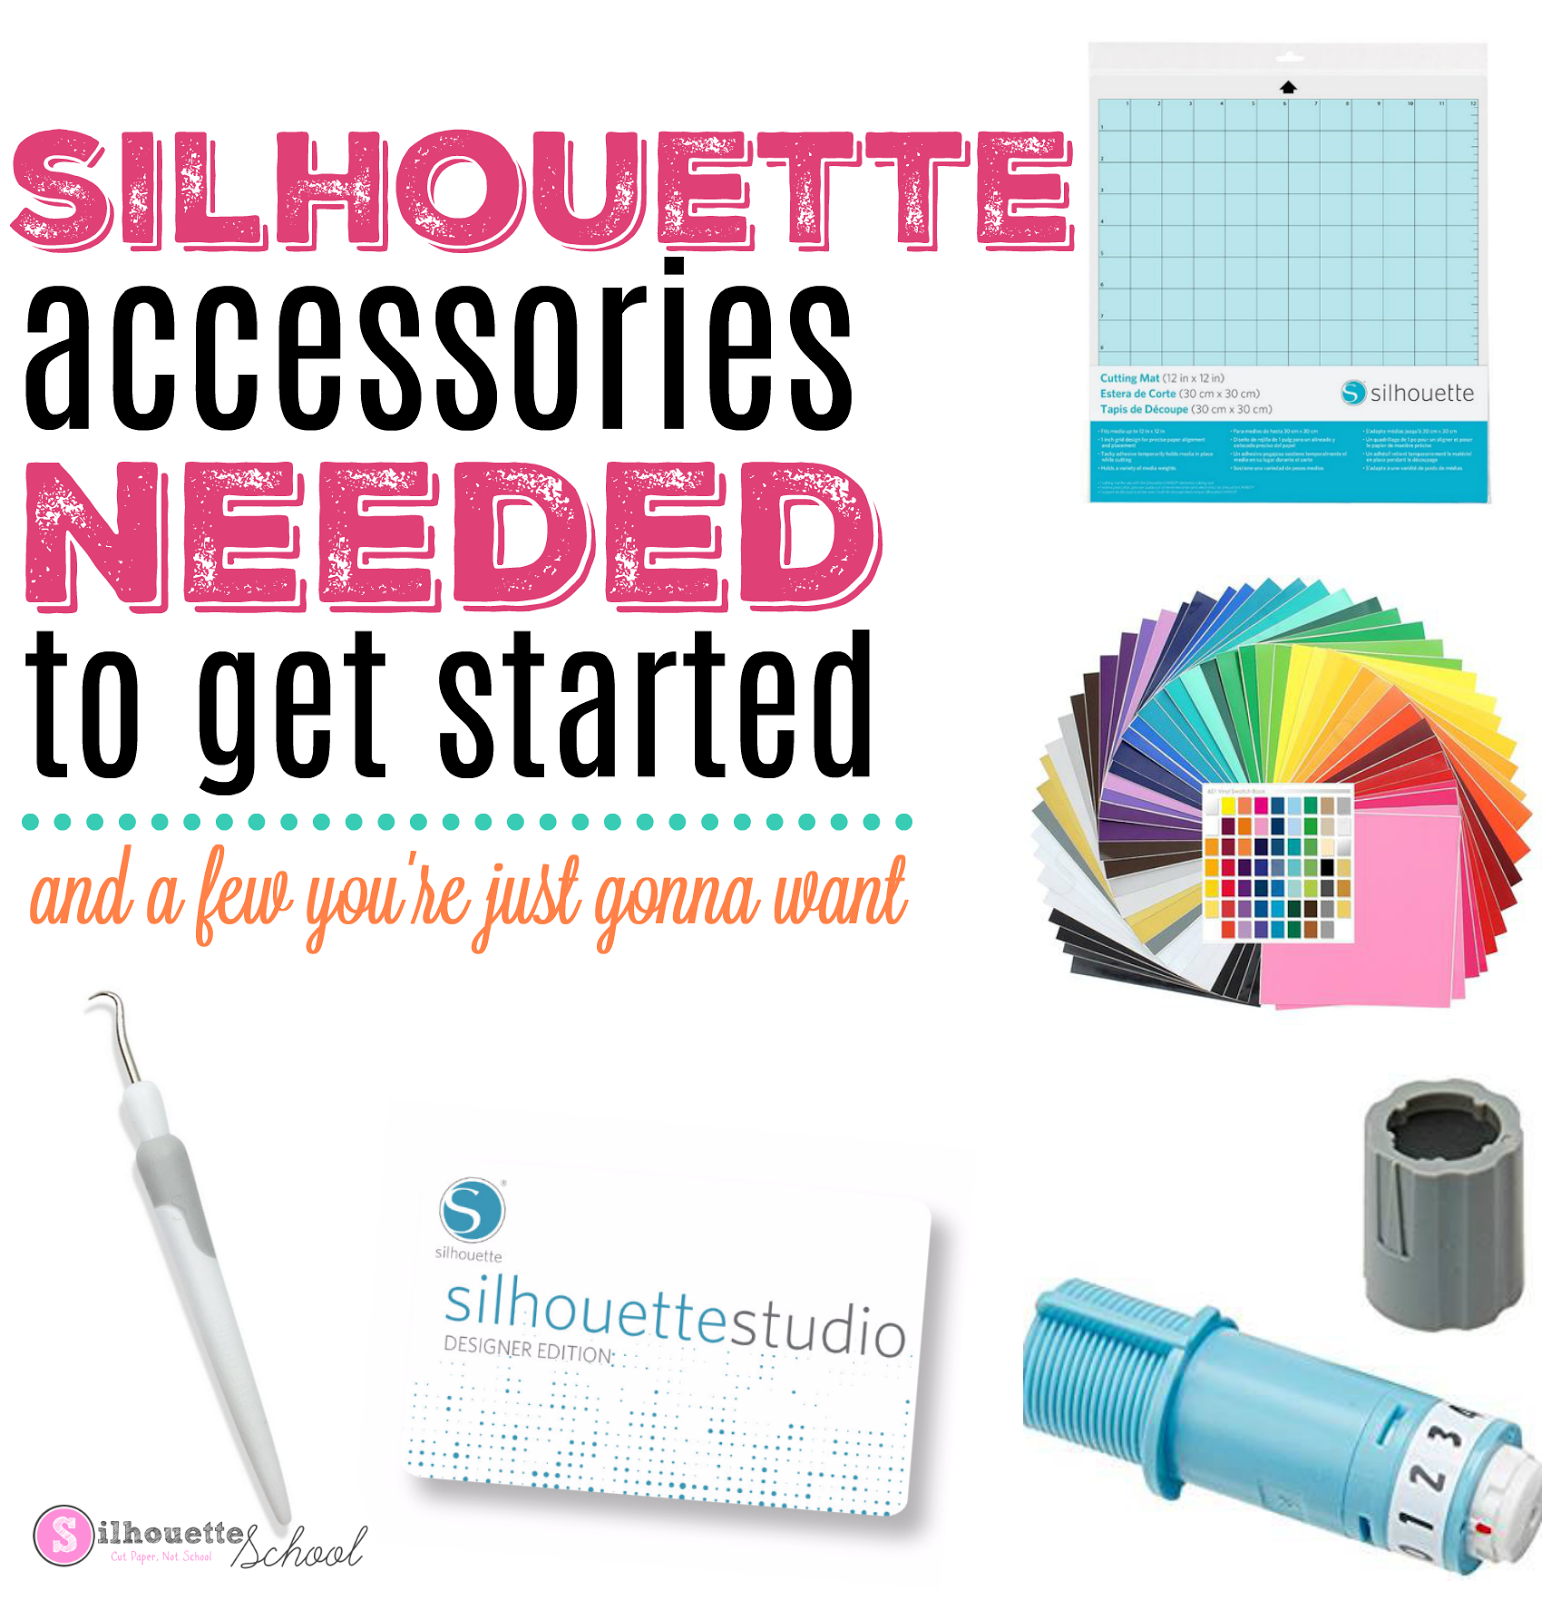 Tools - Silhouette Accessories - Page 1 - Crafts Plus